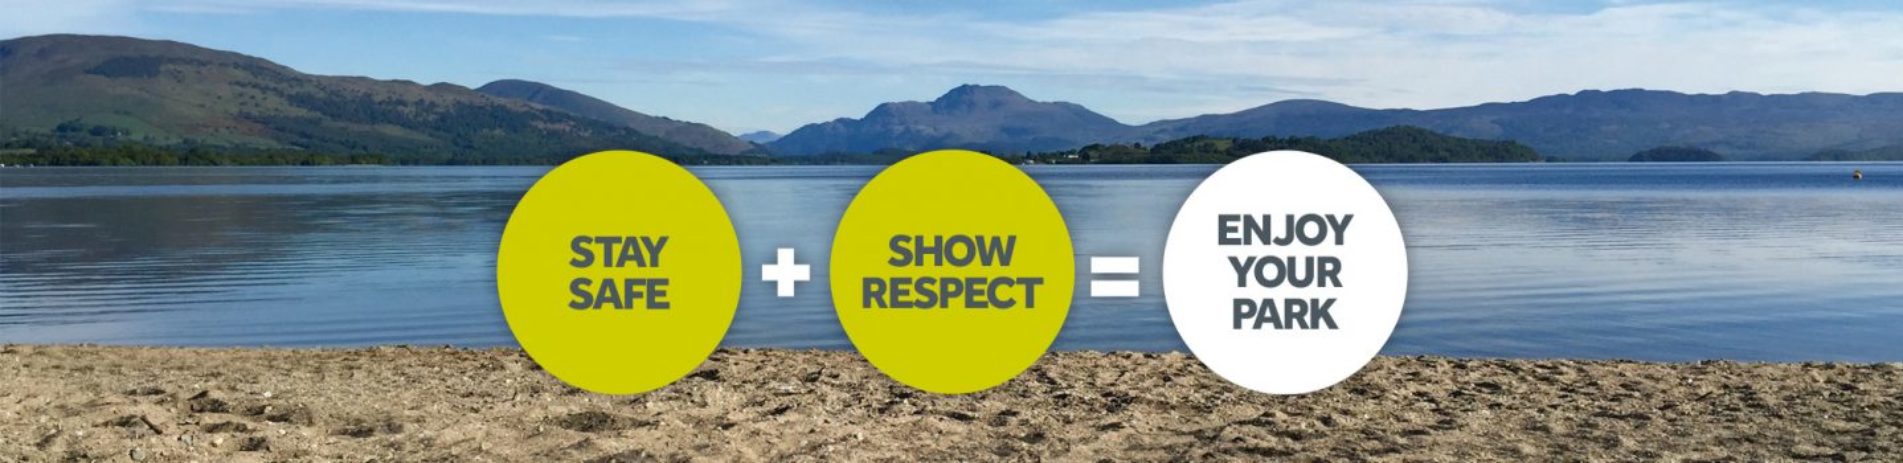 loch-view-and-mountains-stay-safe-show-respect-enjoy-your-park